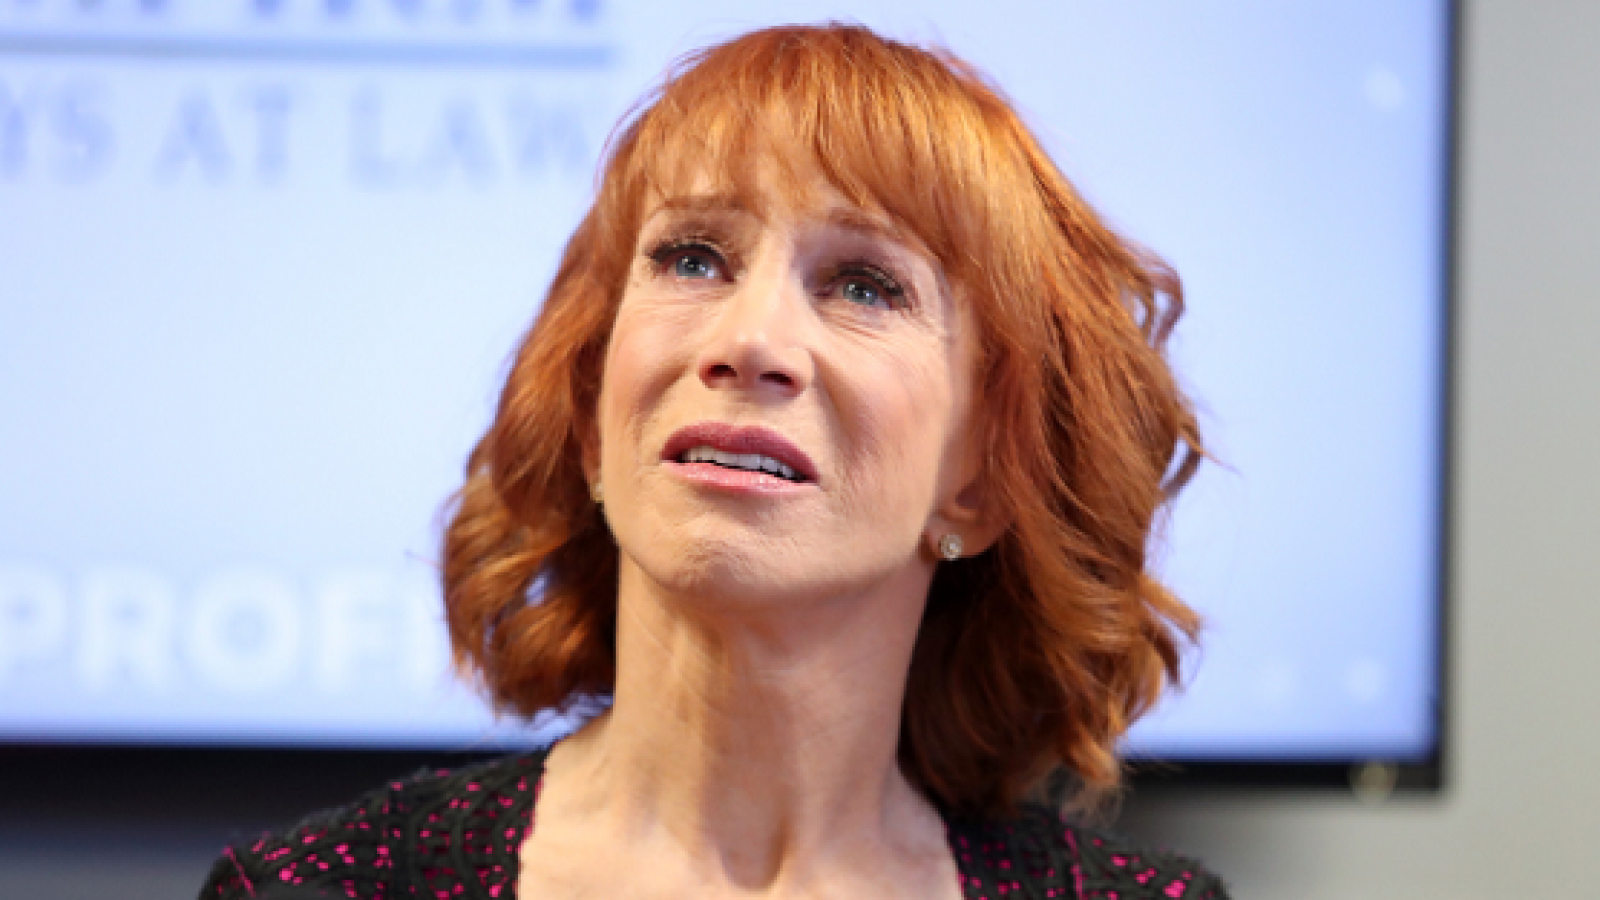 Kathy Griffin May Have Permanent Damage From Her Cancer Treatment | Traitslab